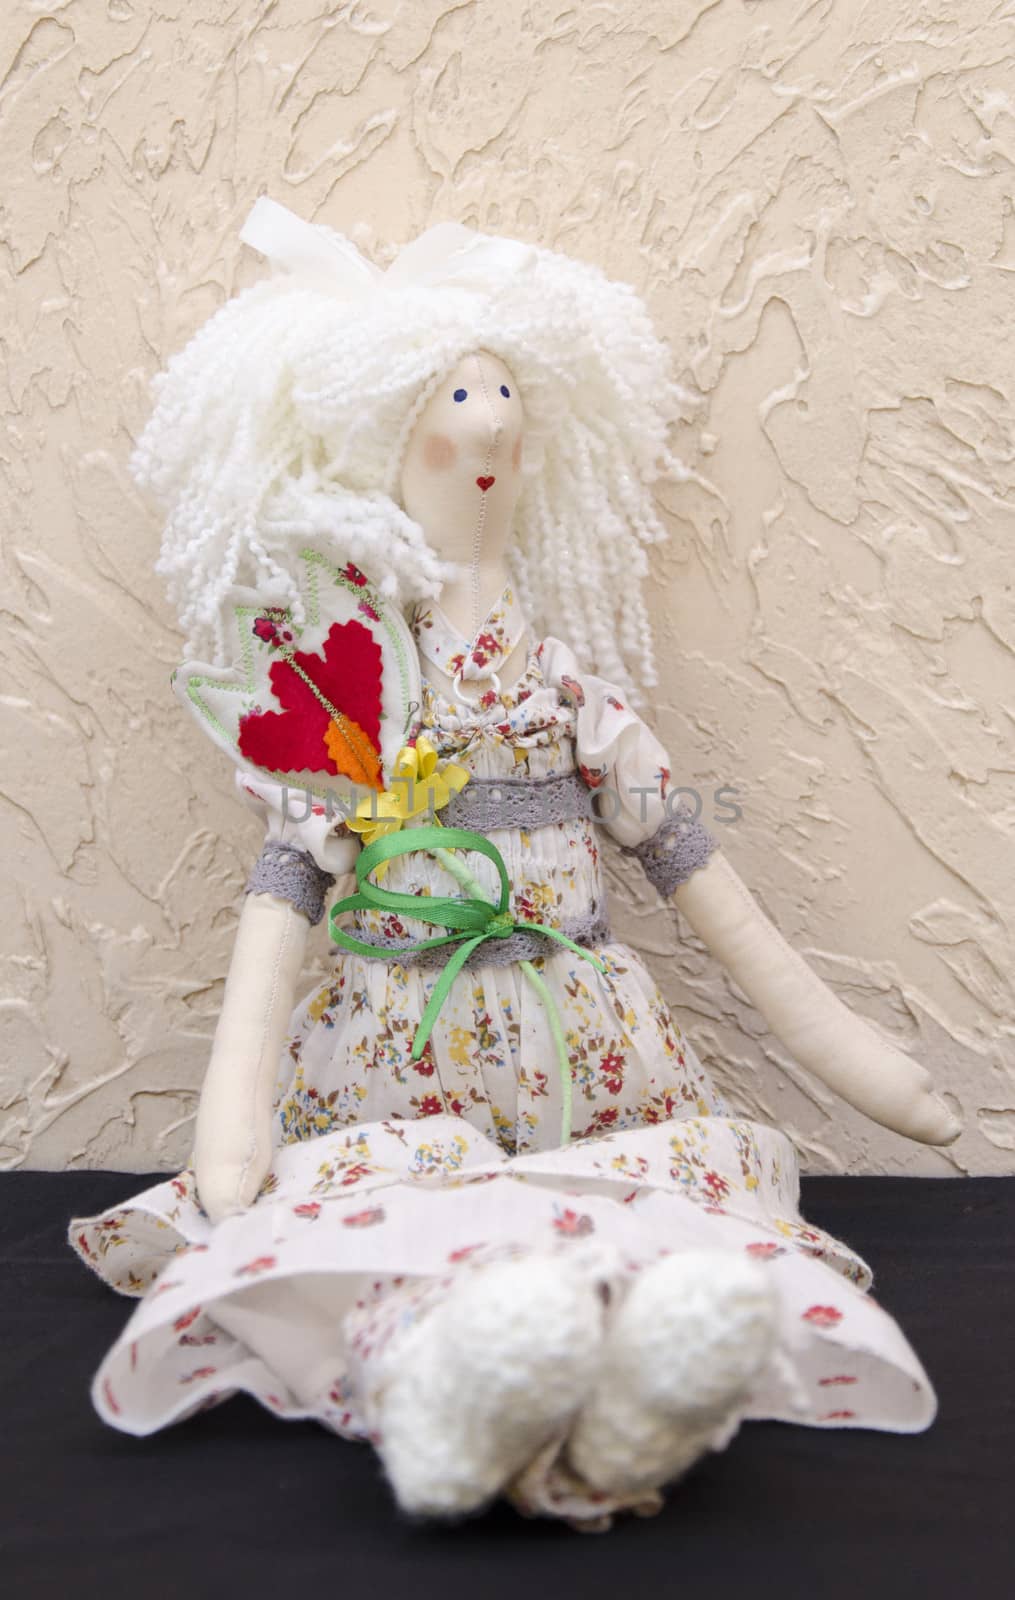 The Handmade doll with a flower in his belt in a long white dress sitting